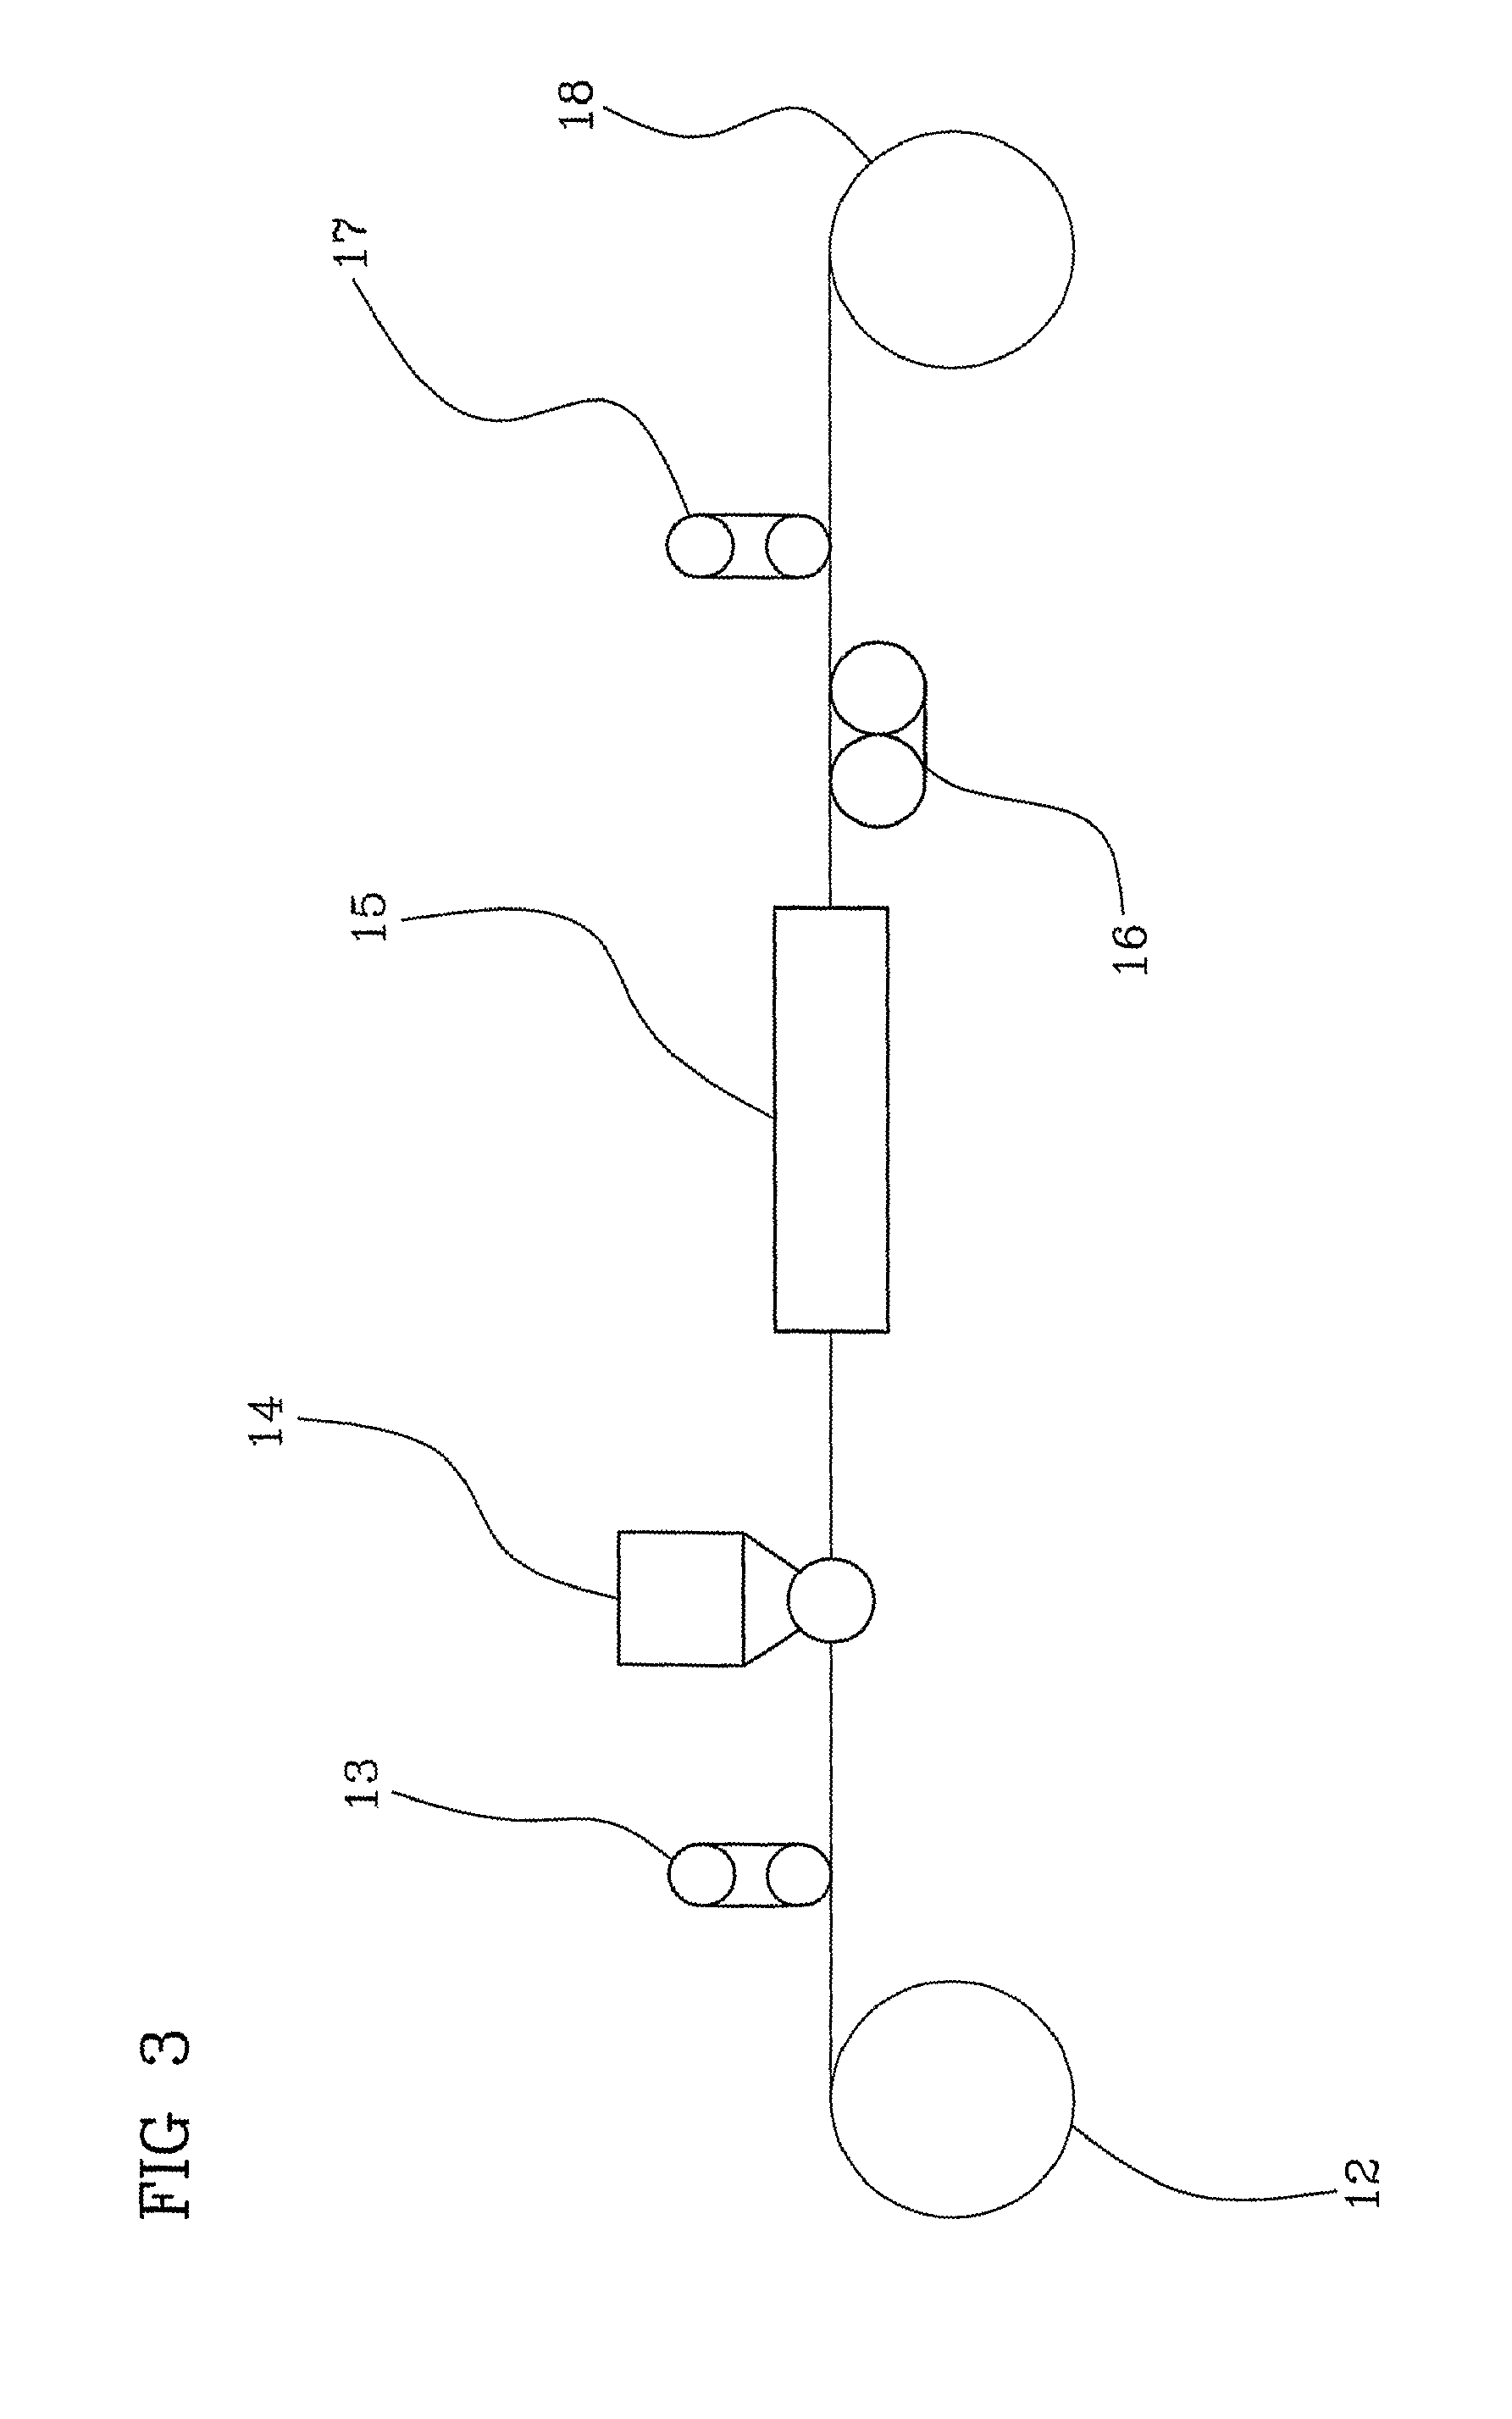 Telecommunication cable equipped with tight-buffered optical fibers